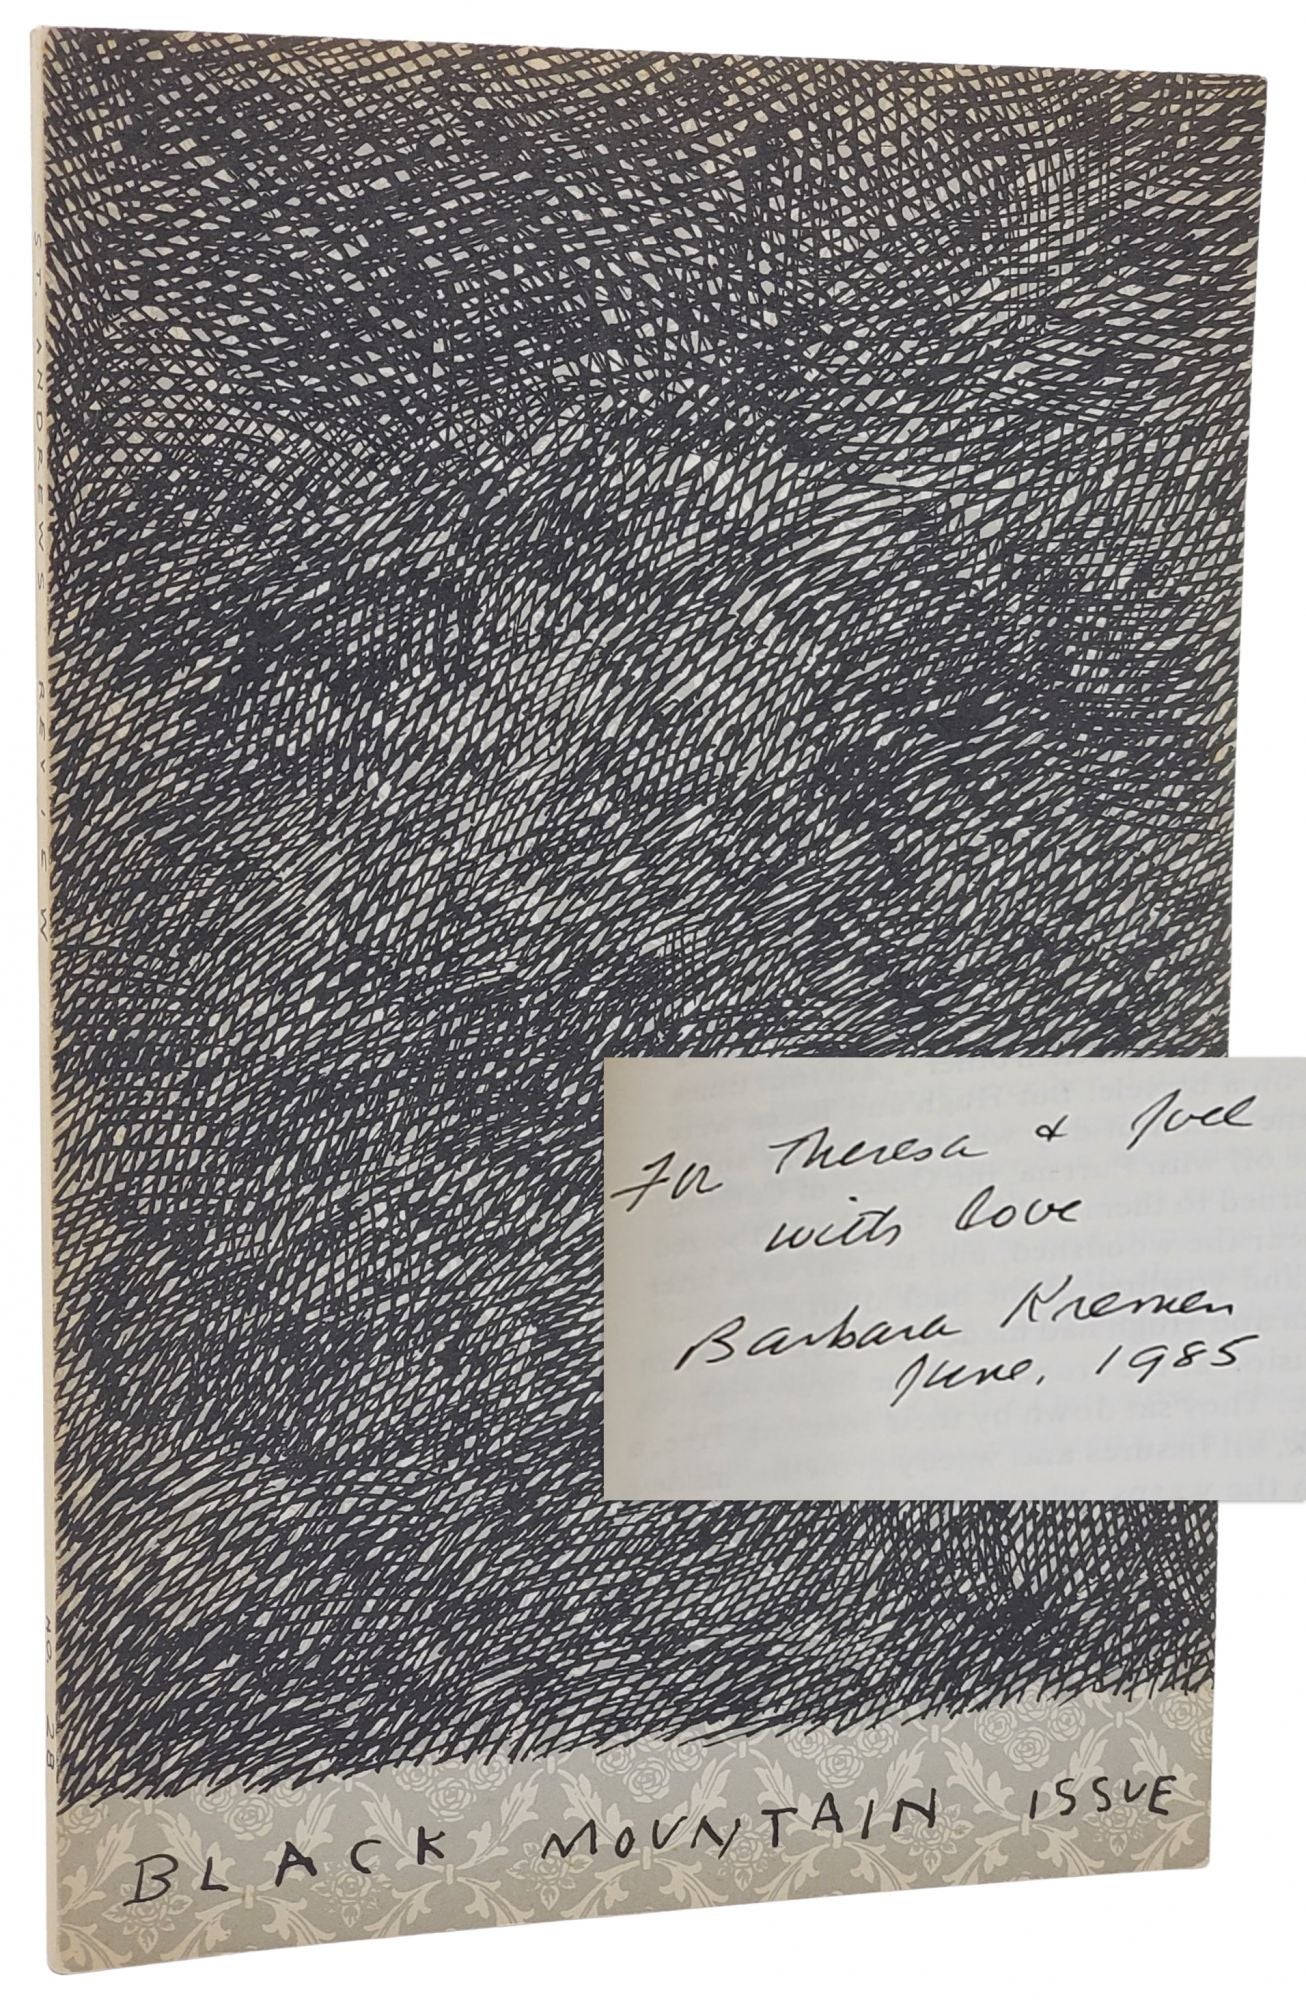 [Book #50638] ST. ANDREWS REVIEW - ISSUE NO. 28 - BLACK MOUNTAIN ISSUE - TREE TROVE - [INSCRIBED WITH HANDWRITTEN NOTE TO JOEL OPPENHEIMER]. Barbara Kremen.